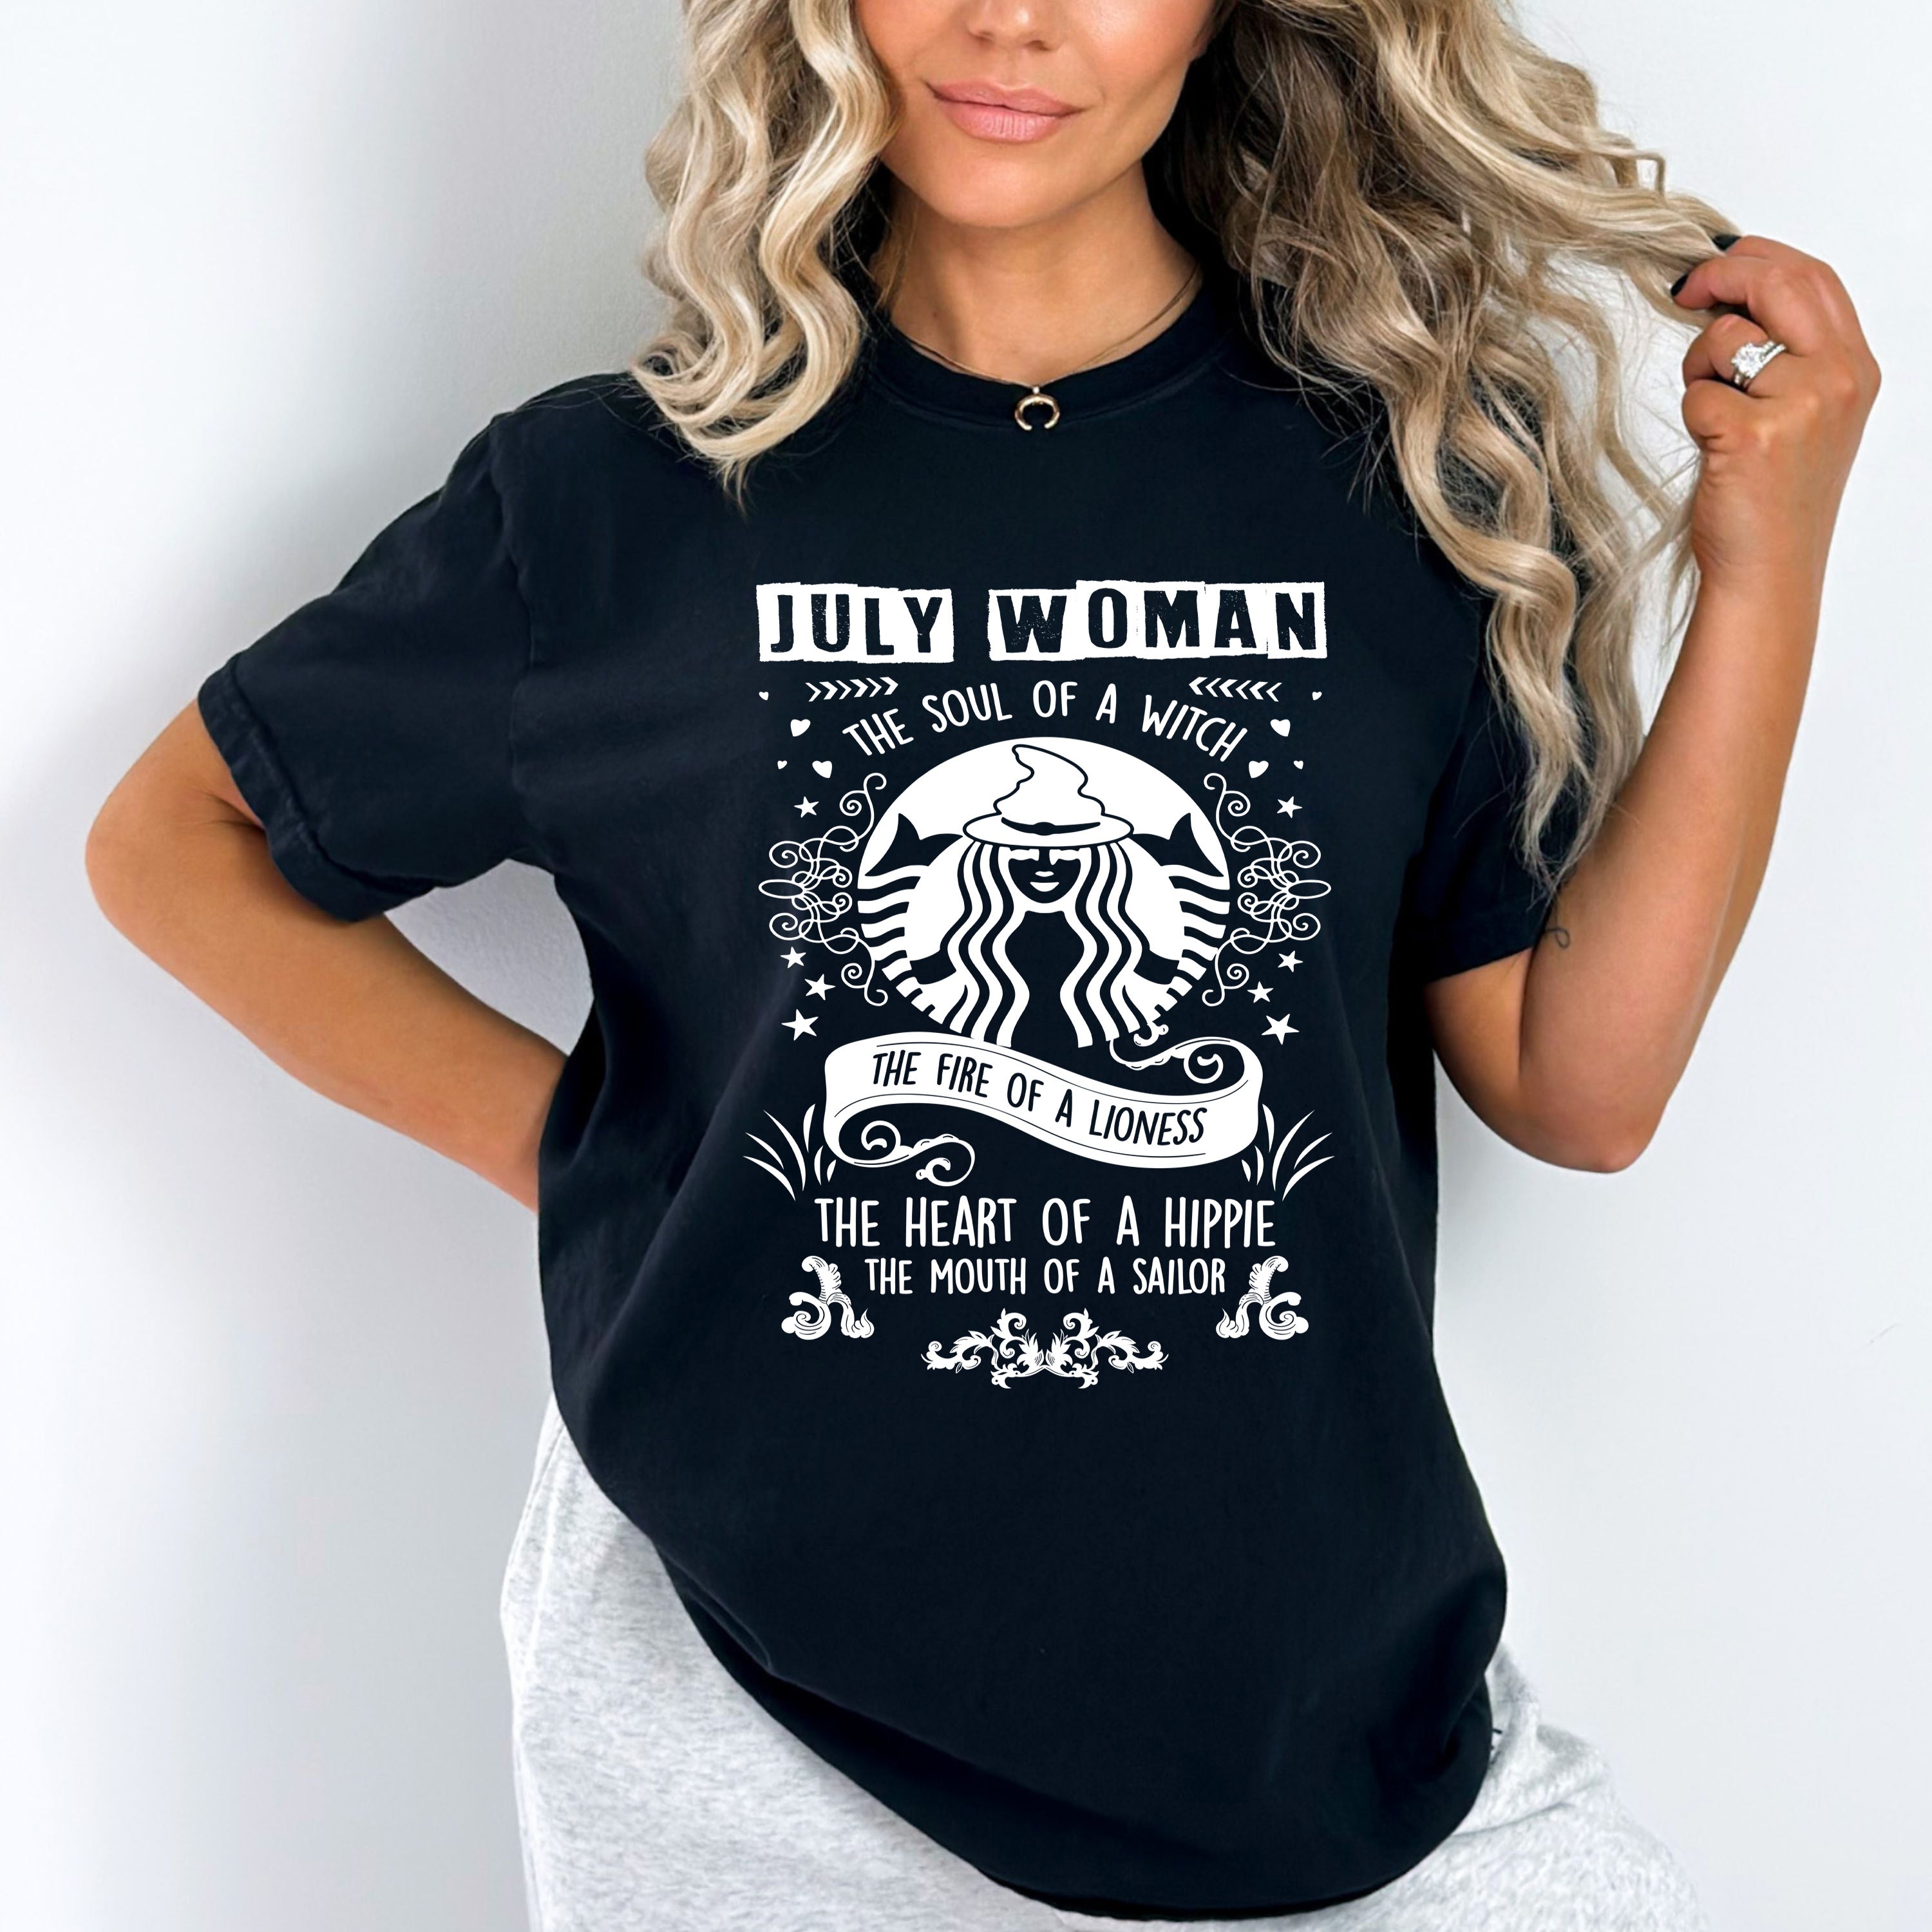 "JULY WOMAN The Soul Of A Witch The Fire Of A Lioness The Heart Of A Hippie...",T-Shirt.